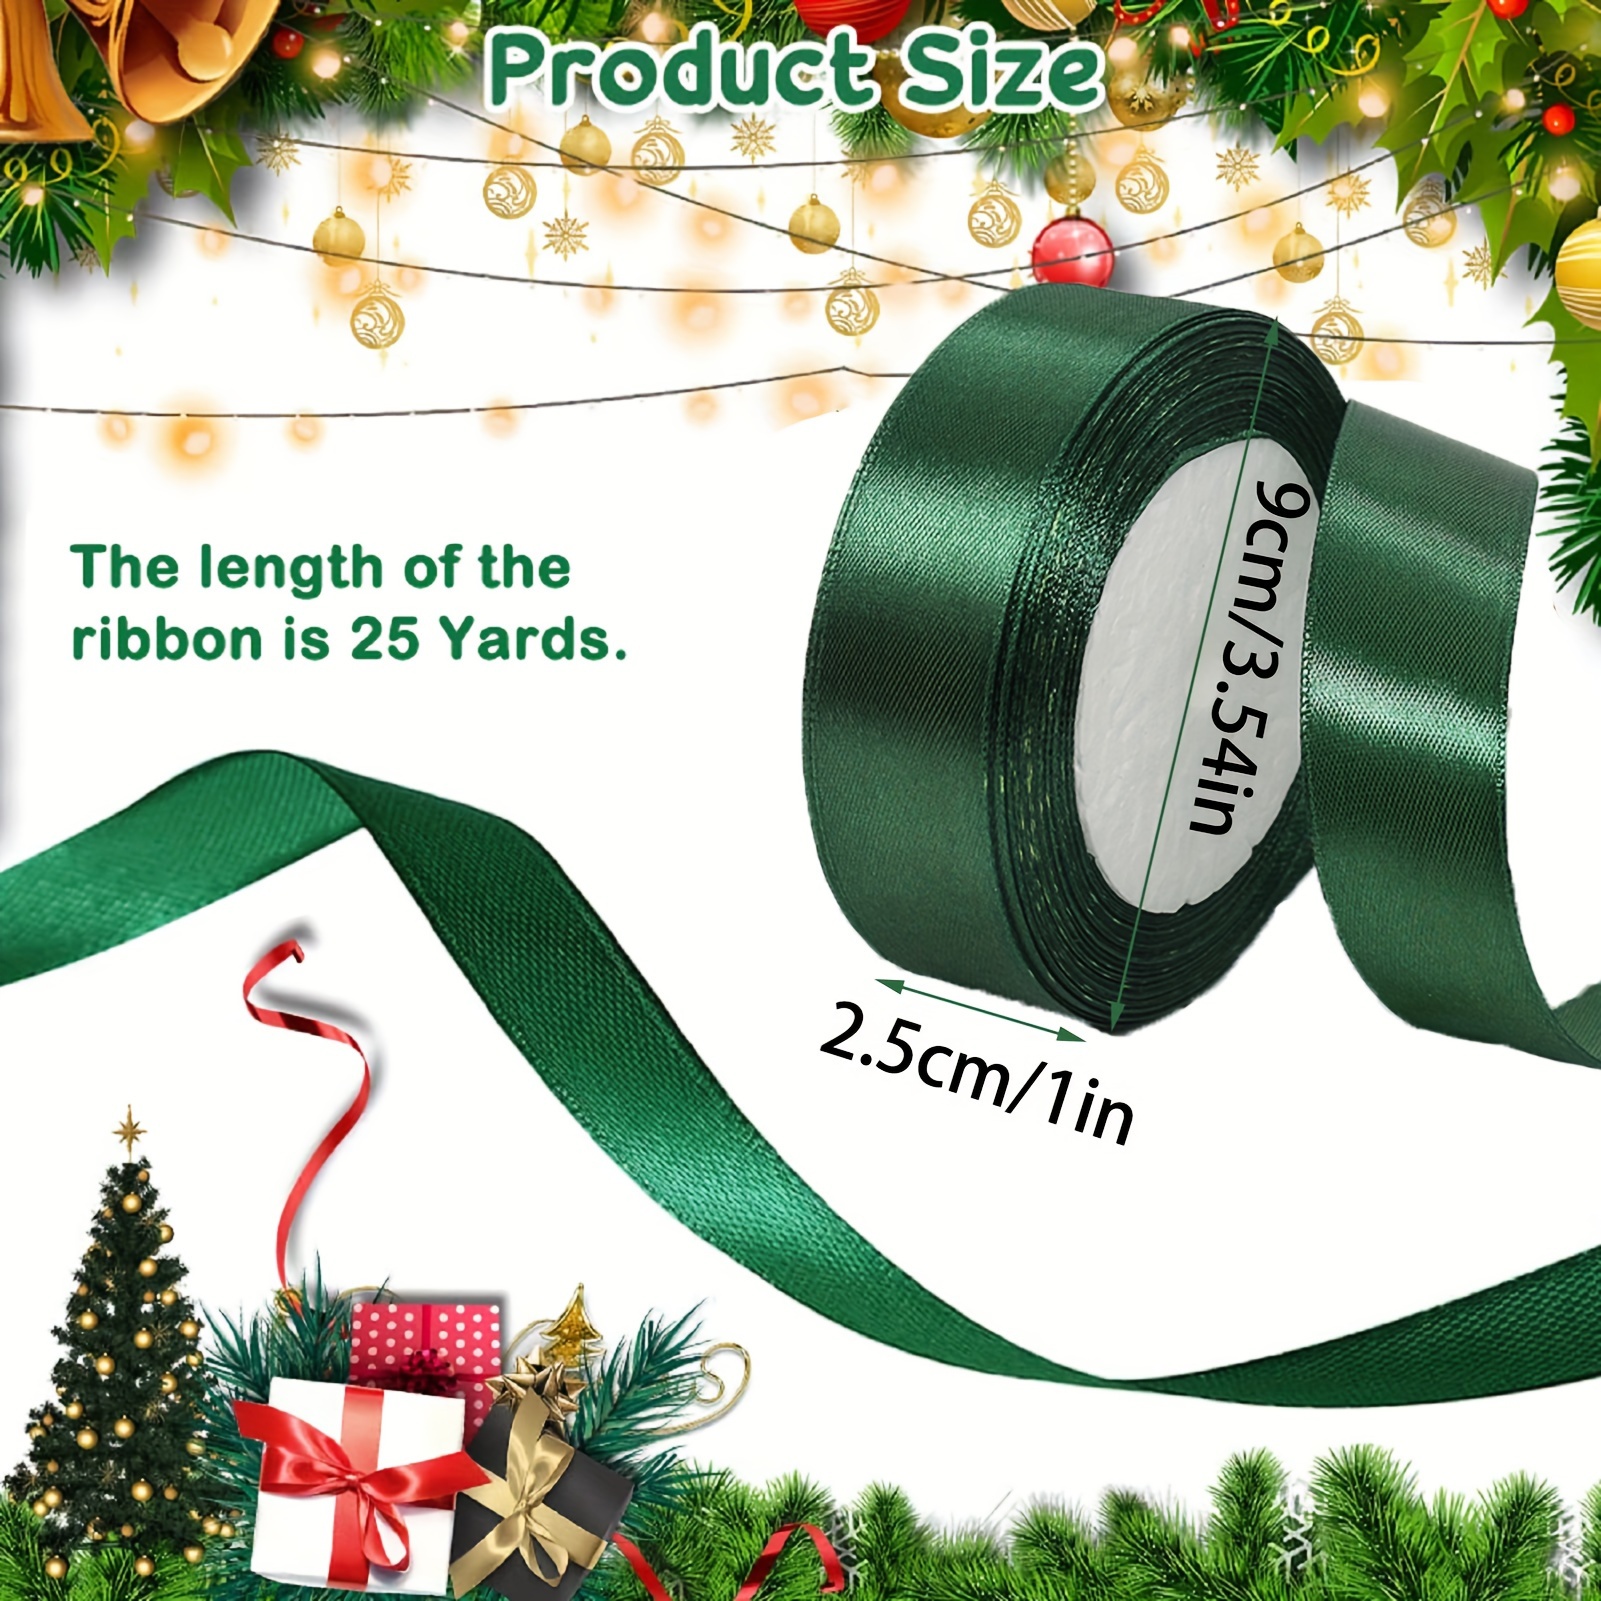 150 Yards Christmas Ribbon for Gift Wrapping, 3/8Wide Holiday Satin Ribbon for Crafts, Fabric Christmas Wrapping Ribbon for Decorating Ornaments